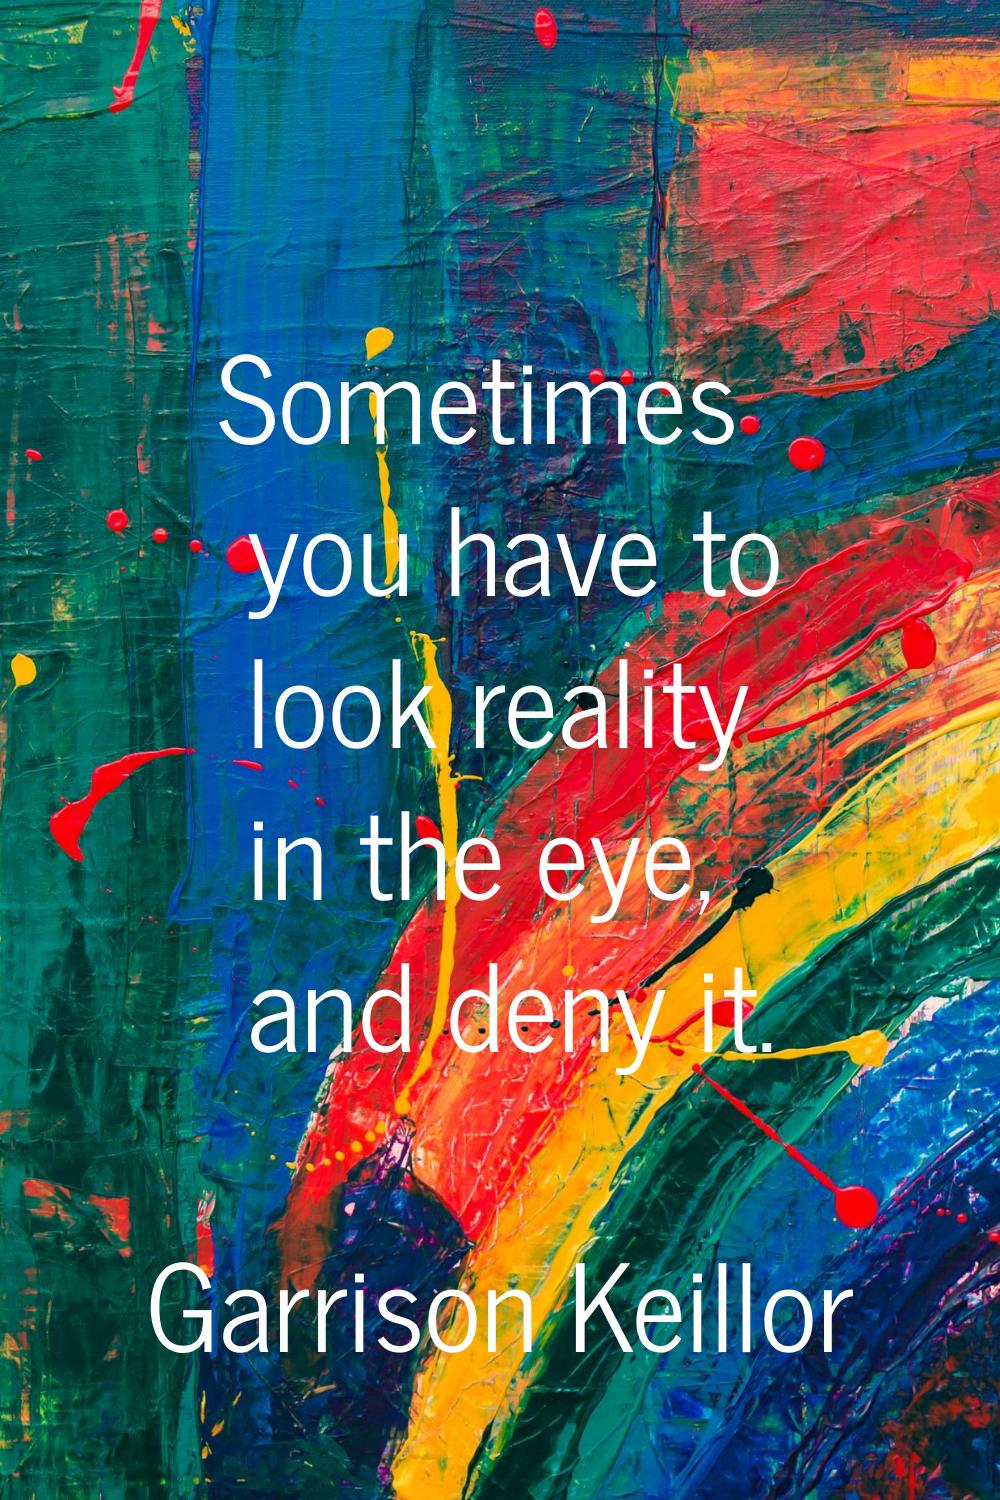 Sometimes you have to look reality in the eye, and deny it.